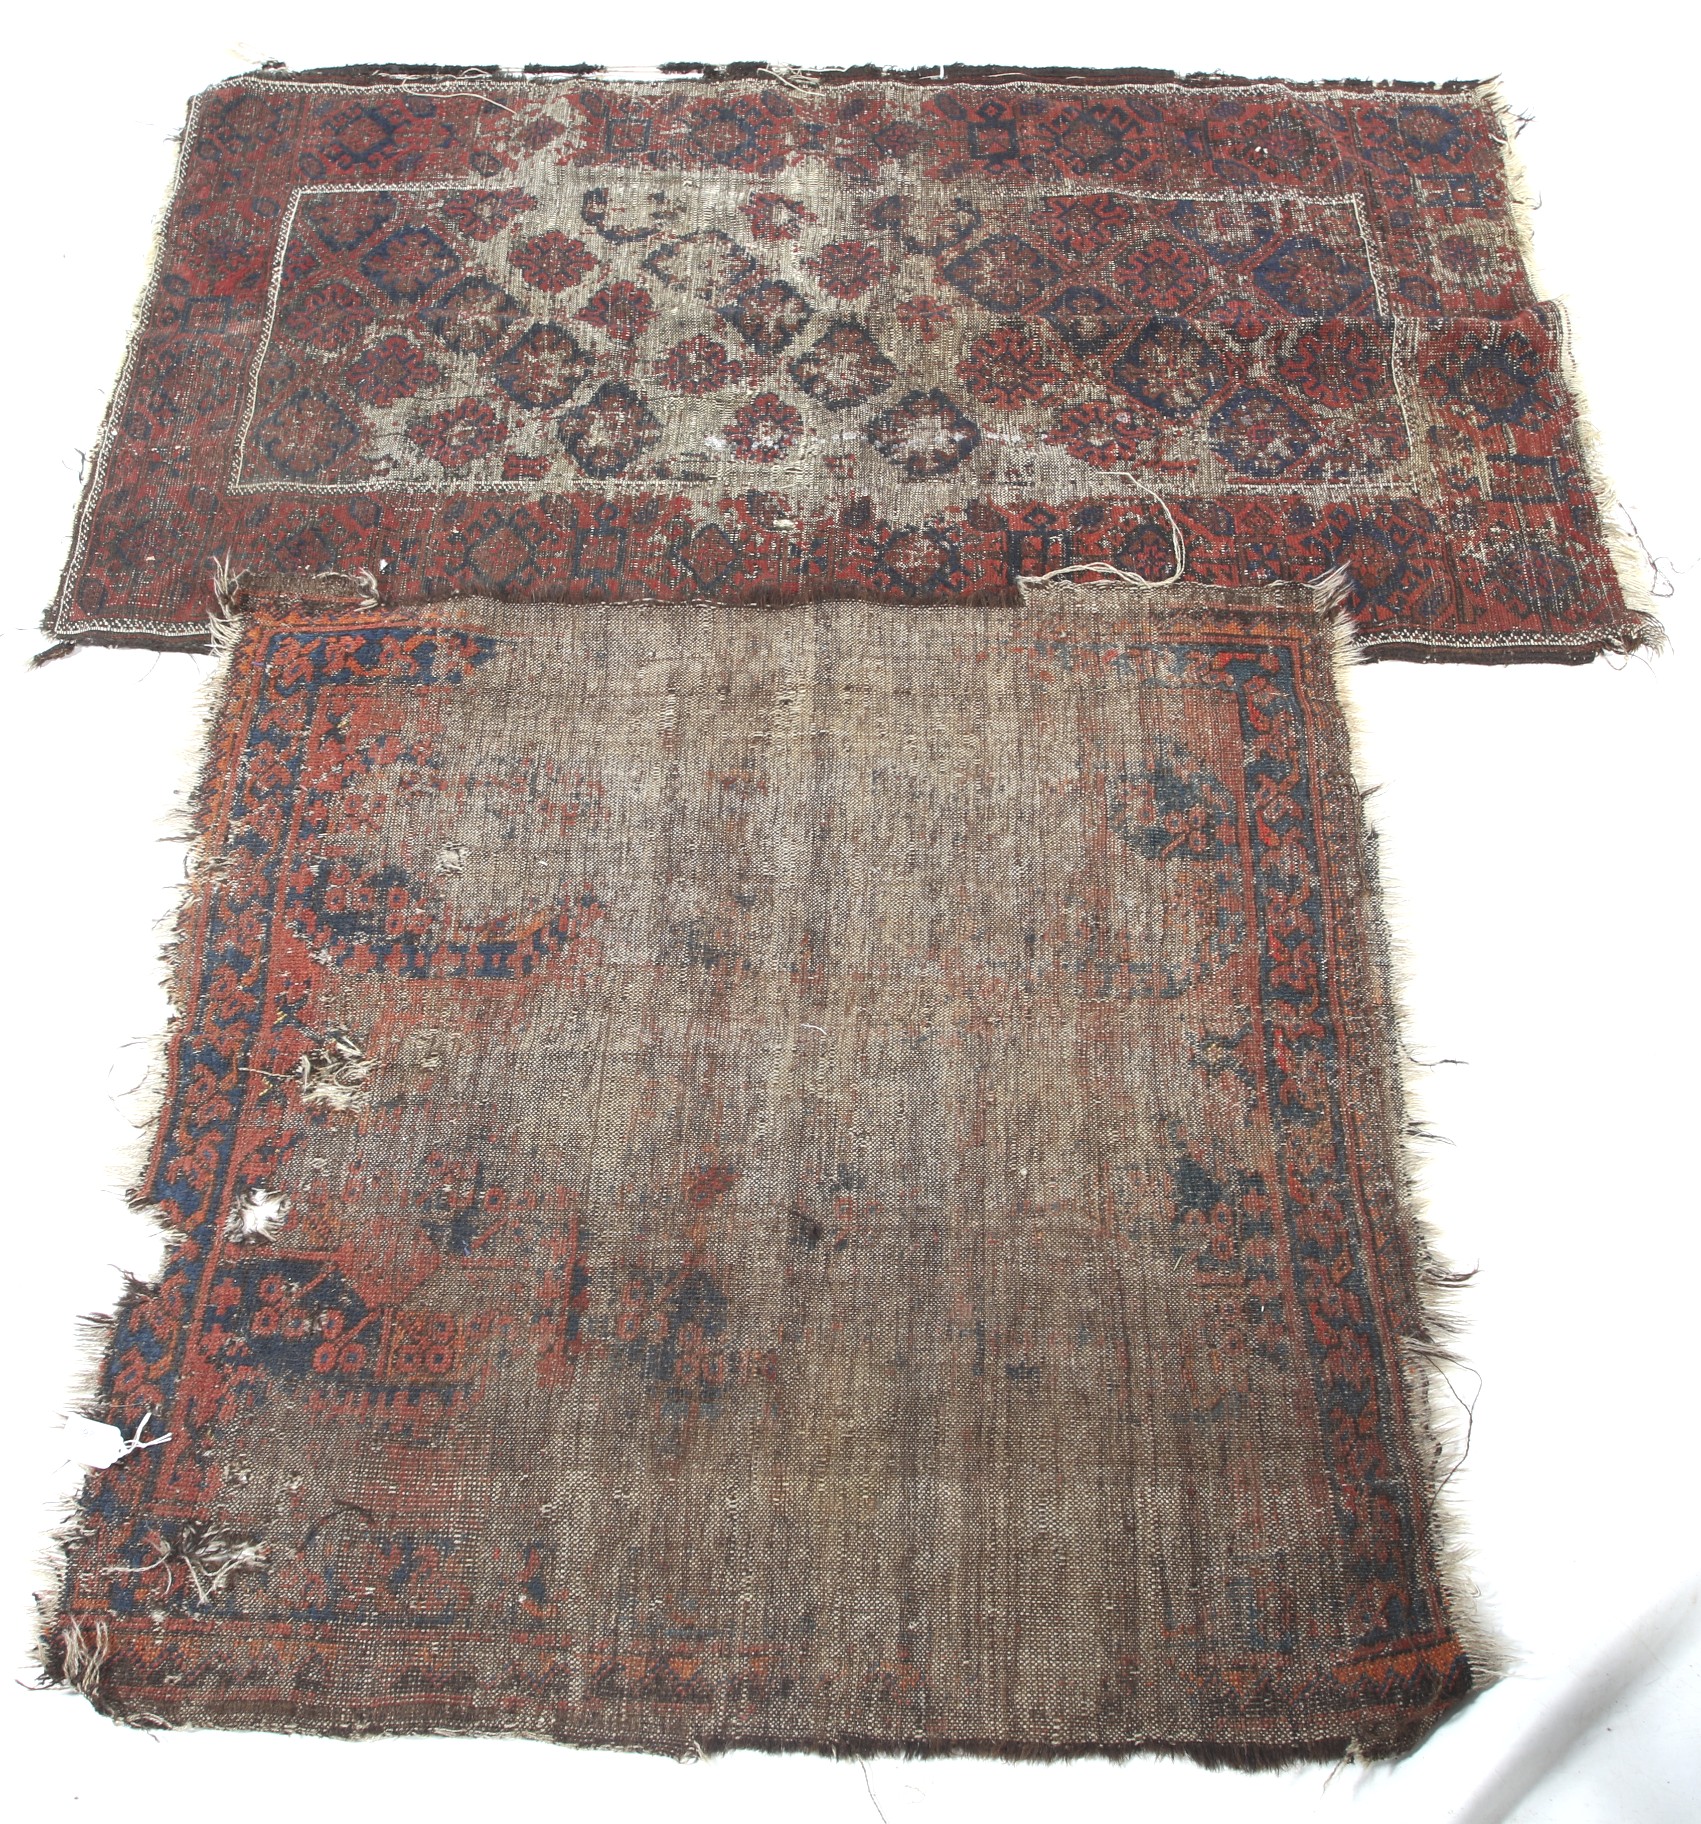 Two 19th century Persian style wool rugs.